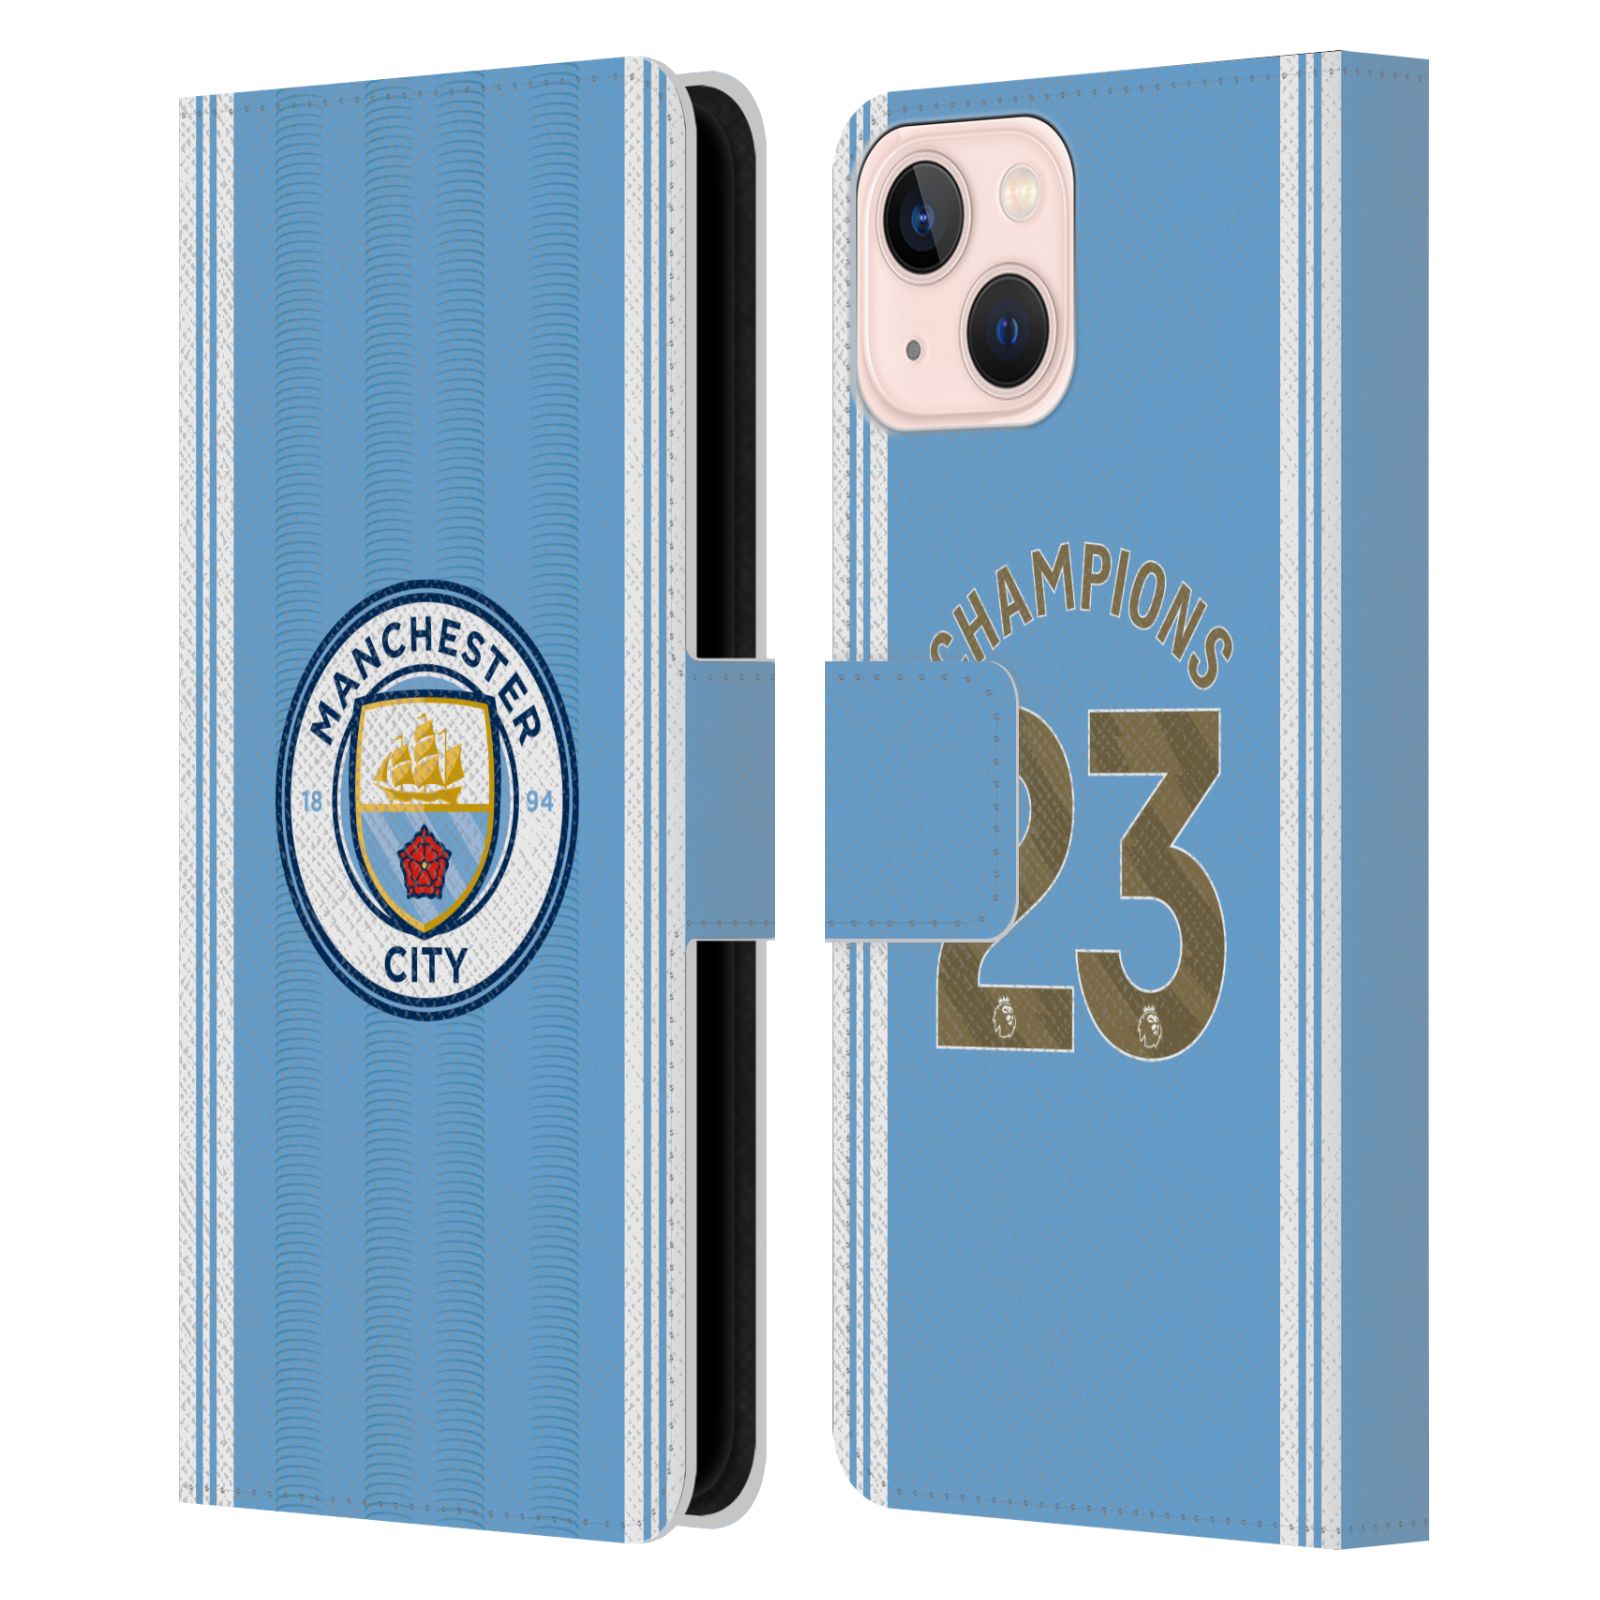 Pouzdro na mobil Apple Iphone 13 - HEAD CASE - Manchester City - Champions dres 2